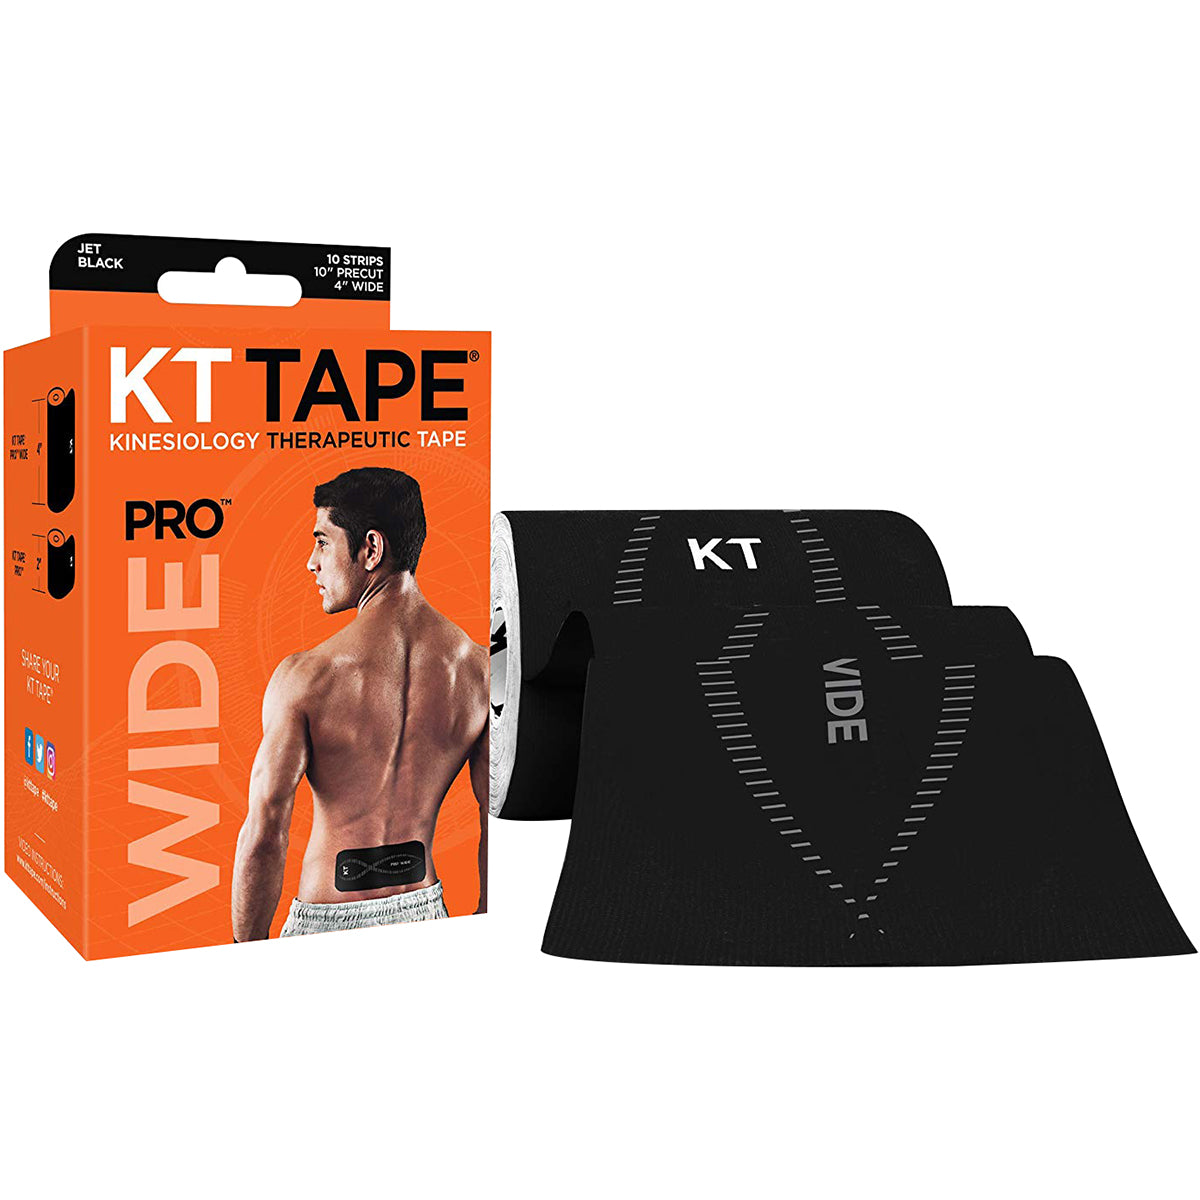 KT Tape Pro Wide 10" Precut Kinesiology Therapeutic Elastic Roll - 10 Strips KT Tape